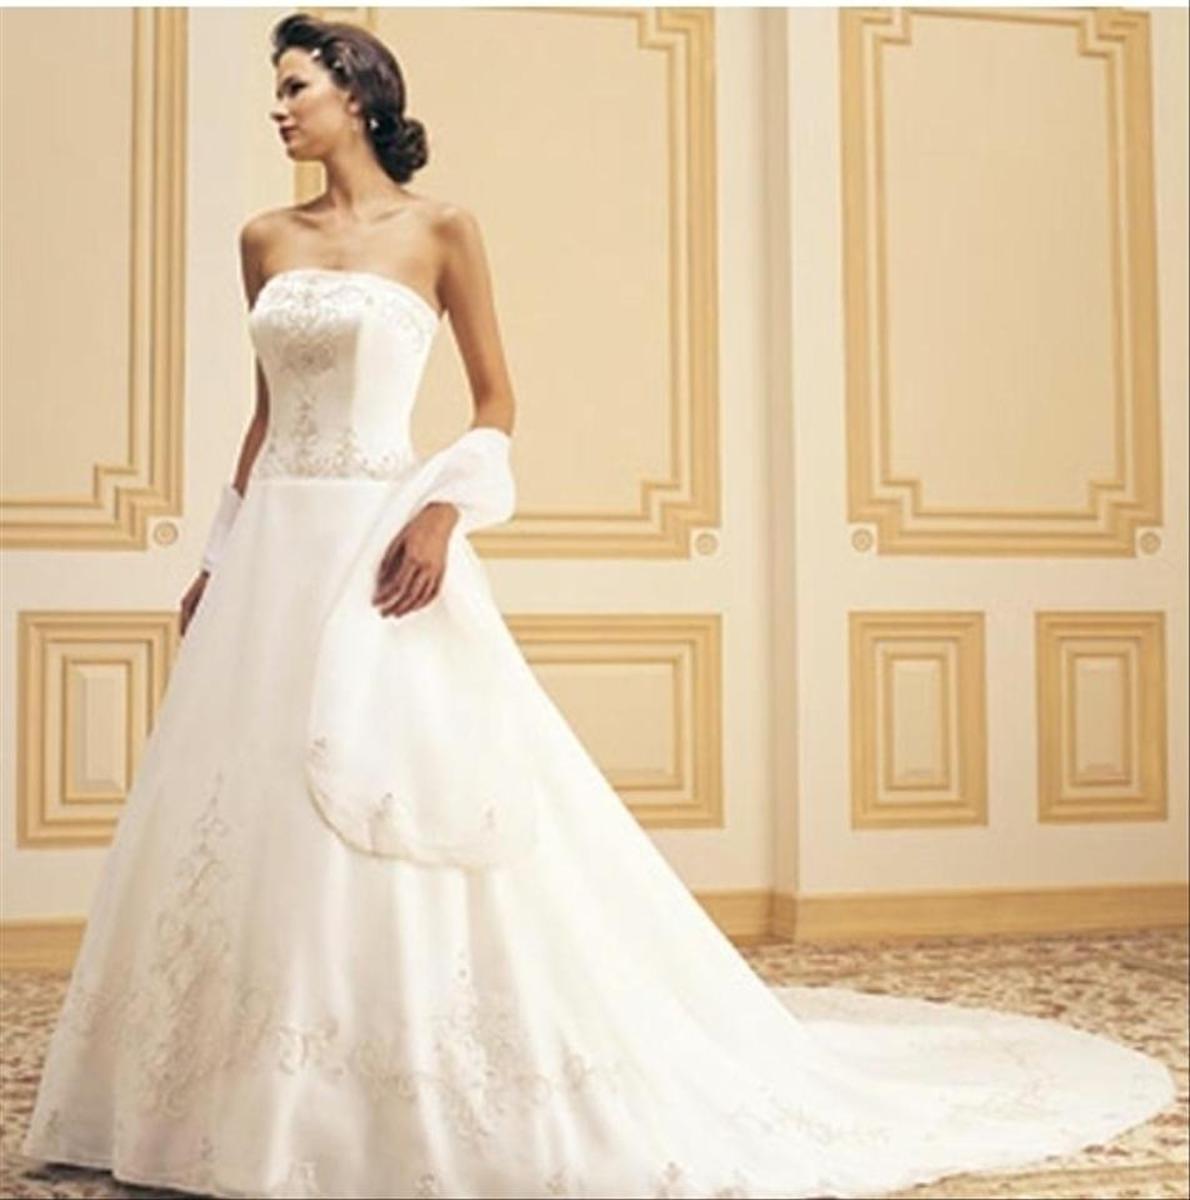 Timeless A-line Bridal Gown